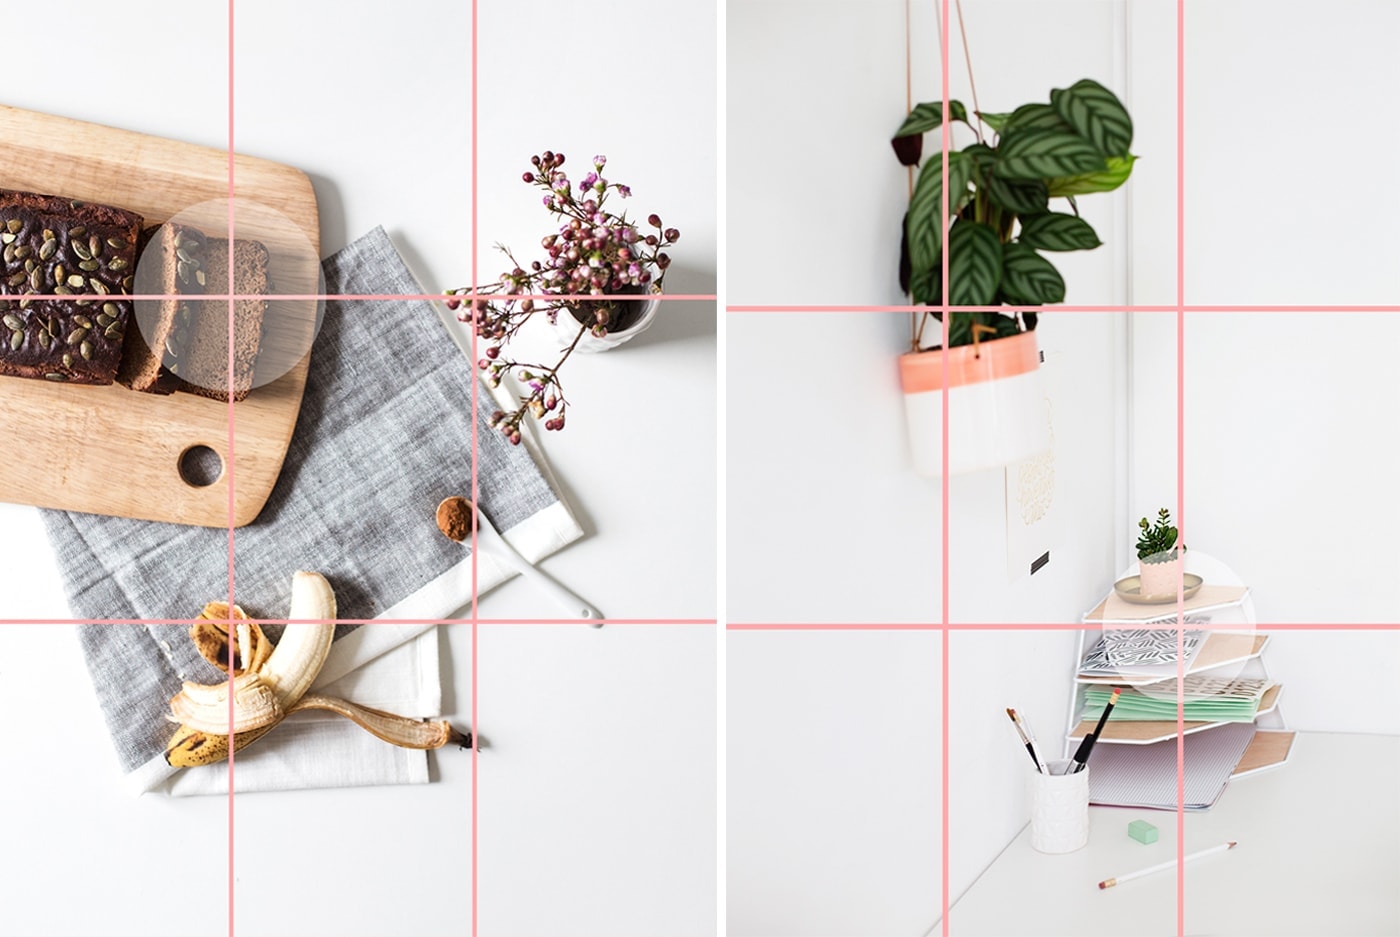 blogger photography tips | rule of thirds